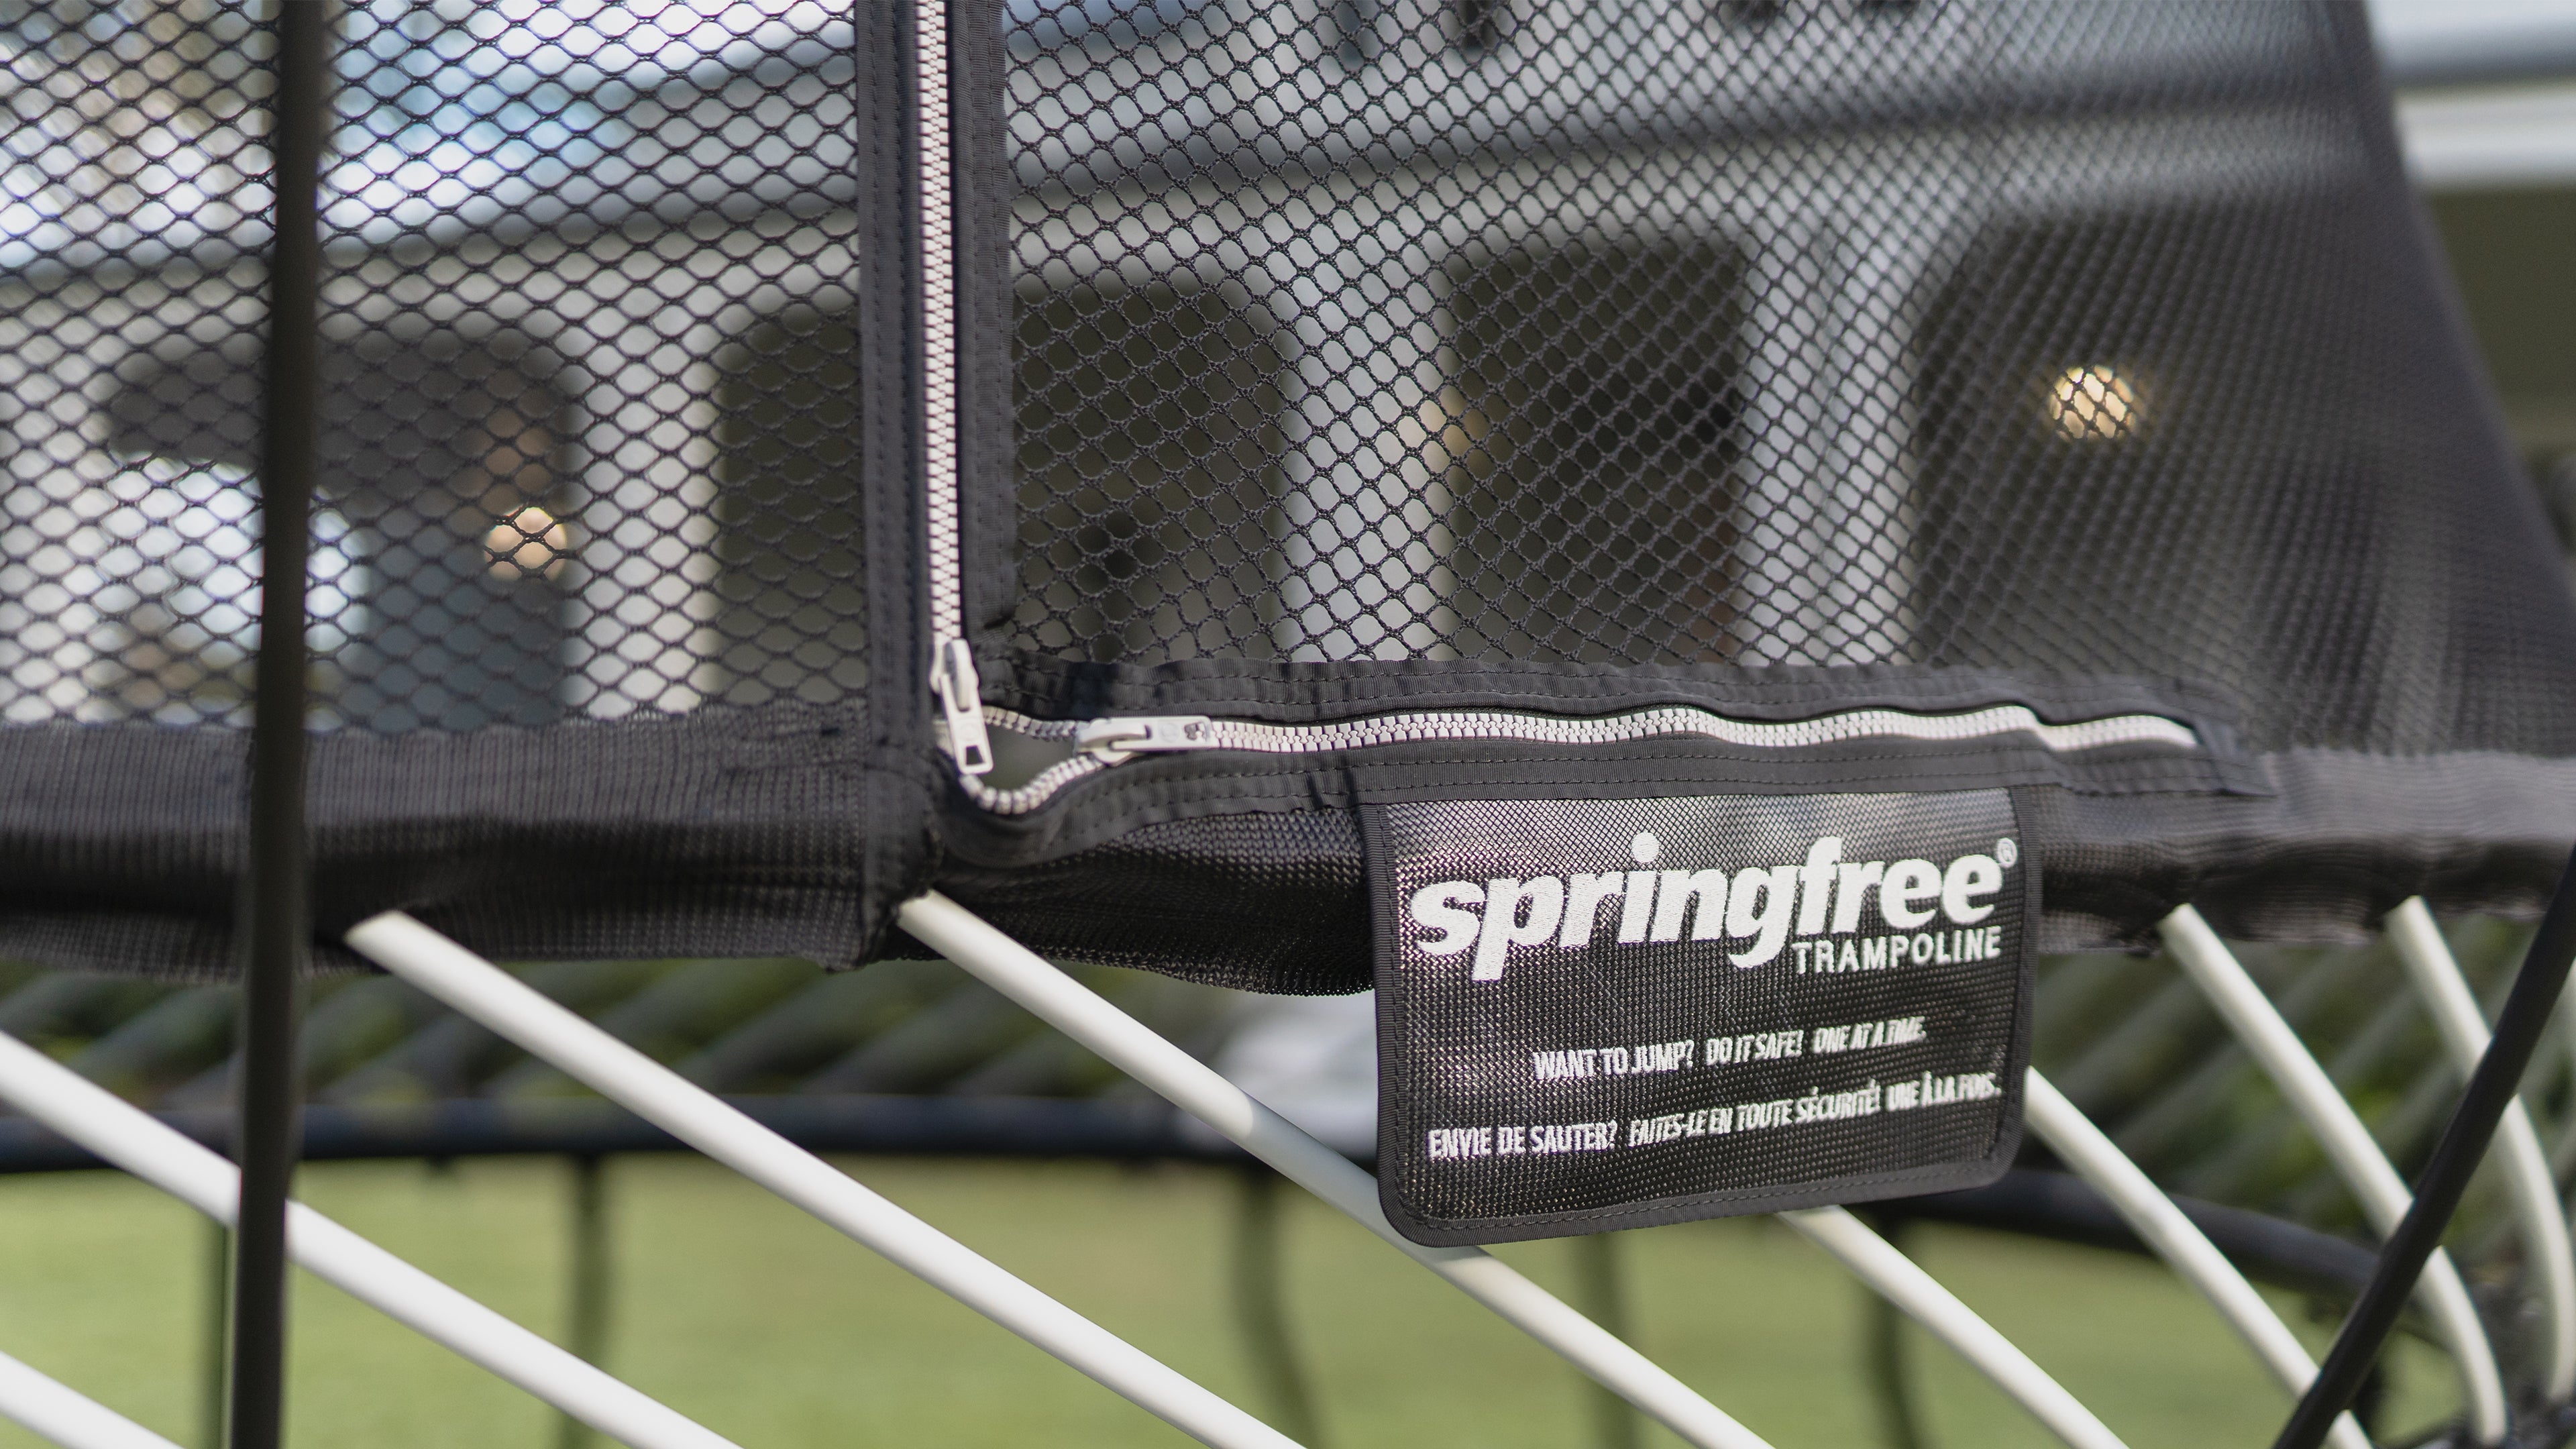 Did You Know These 8 Things About Springfree?